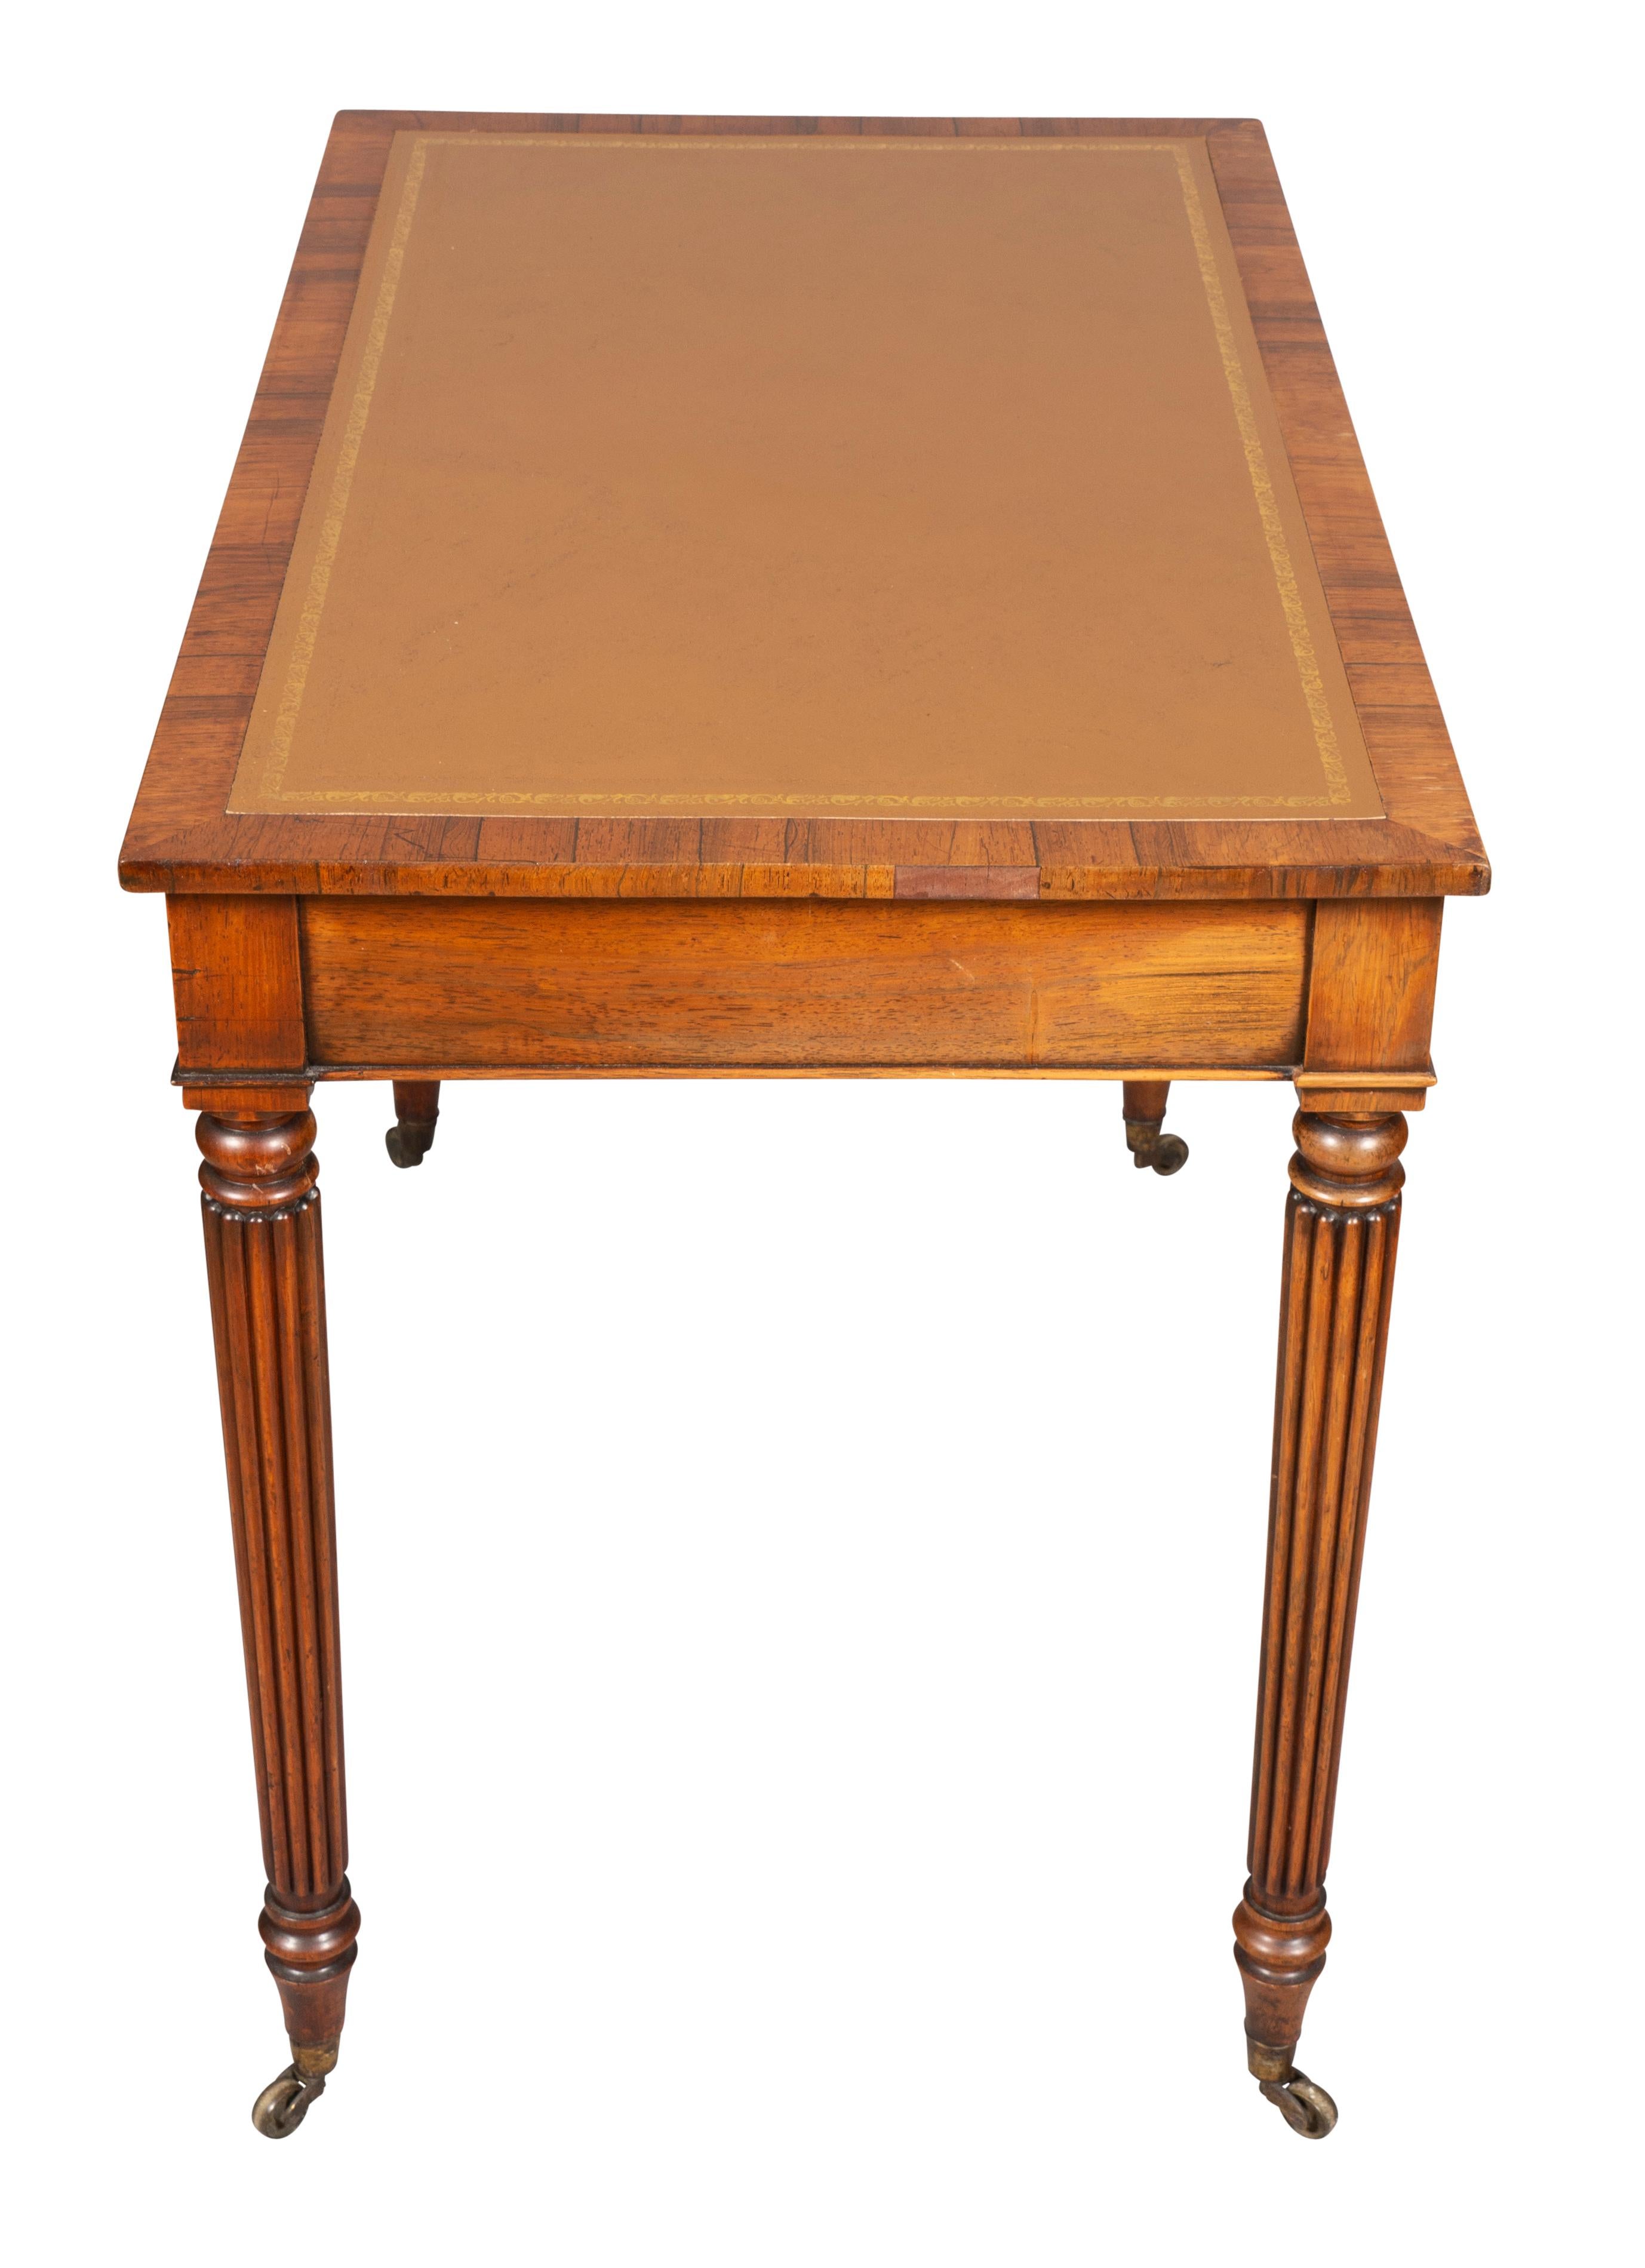 Early 19th Century Regency Rosewood Writing Table For Sale